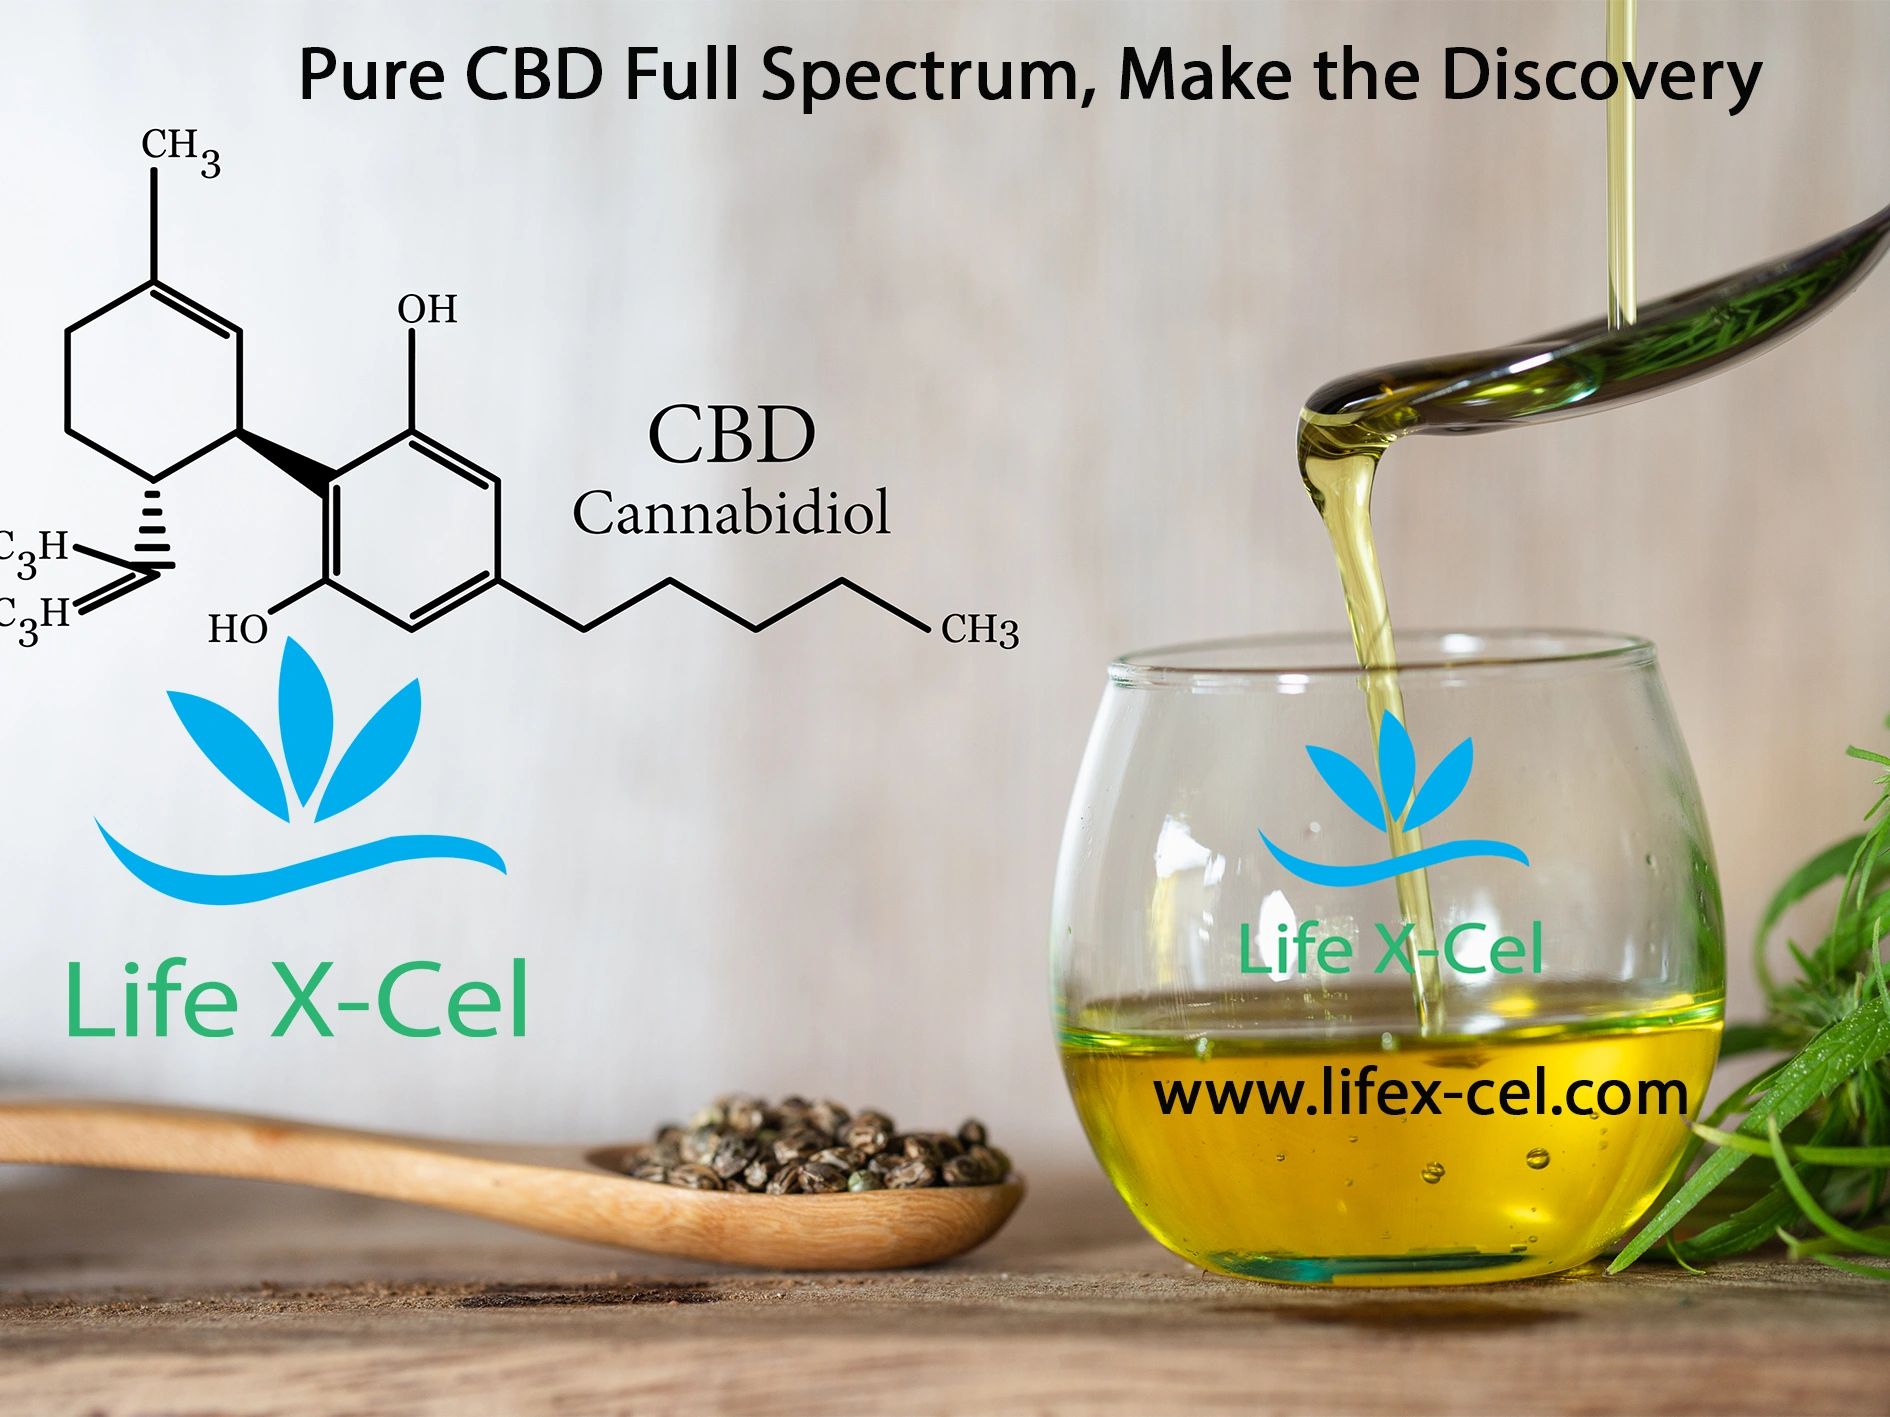 Life X-Cel CBD oil being poured into a glass